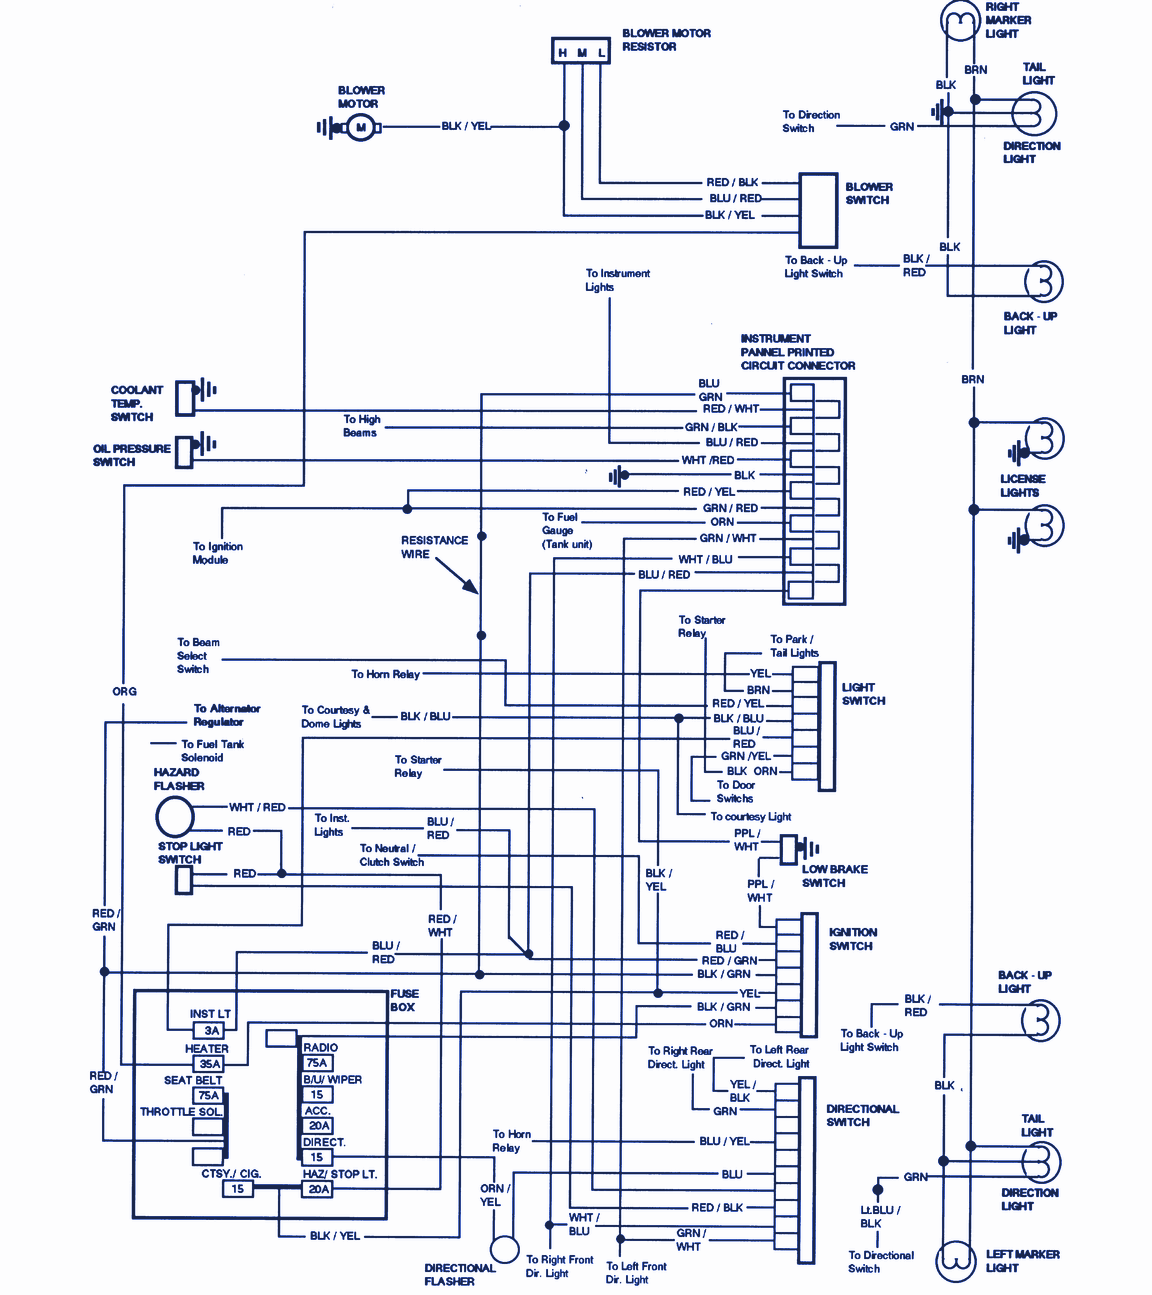 1976 Ford F100 Wiring Diagram from 4.bp.blogspot.com